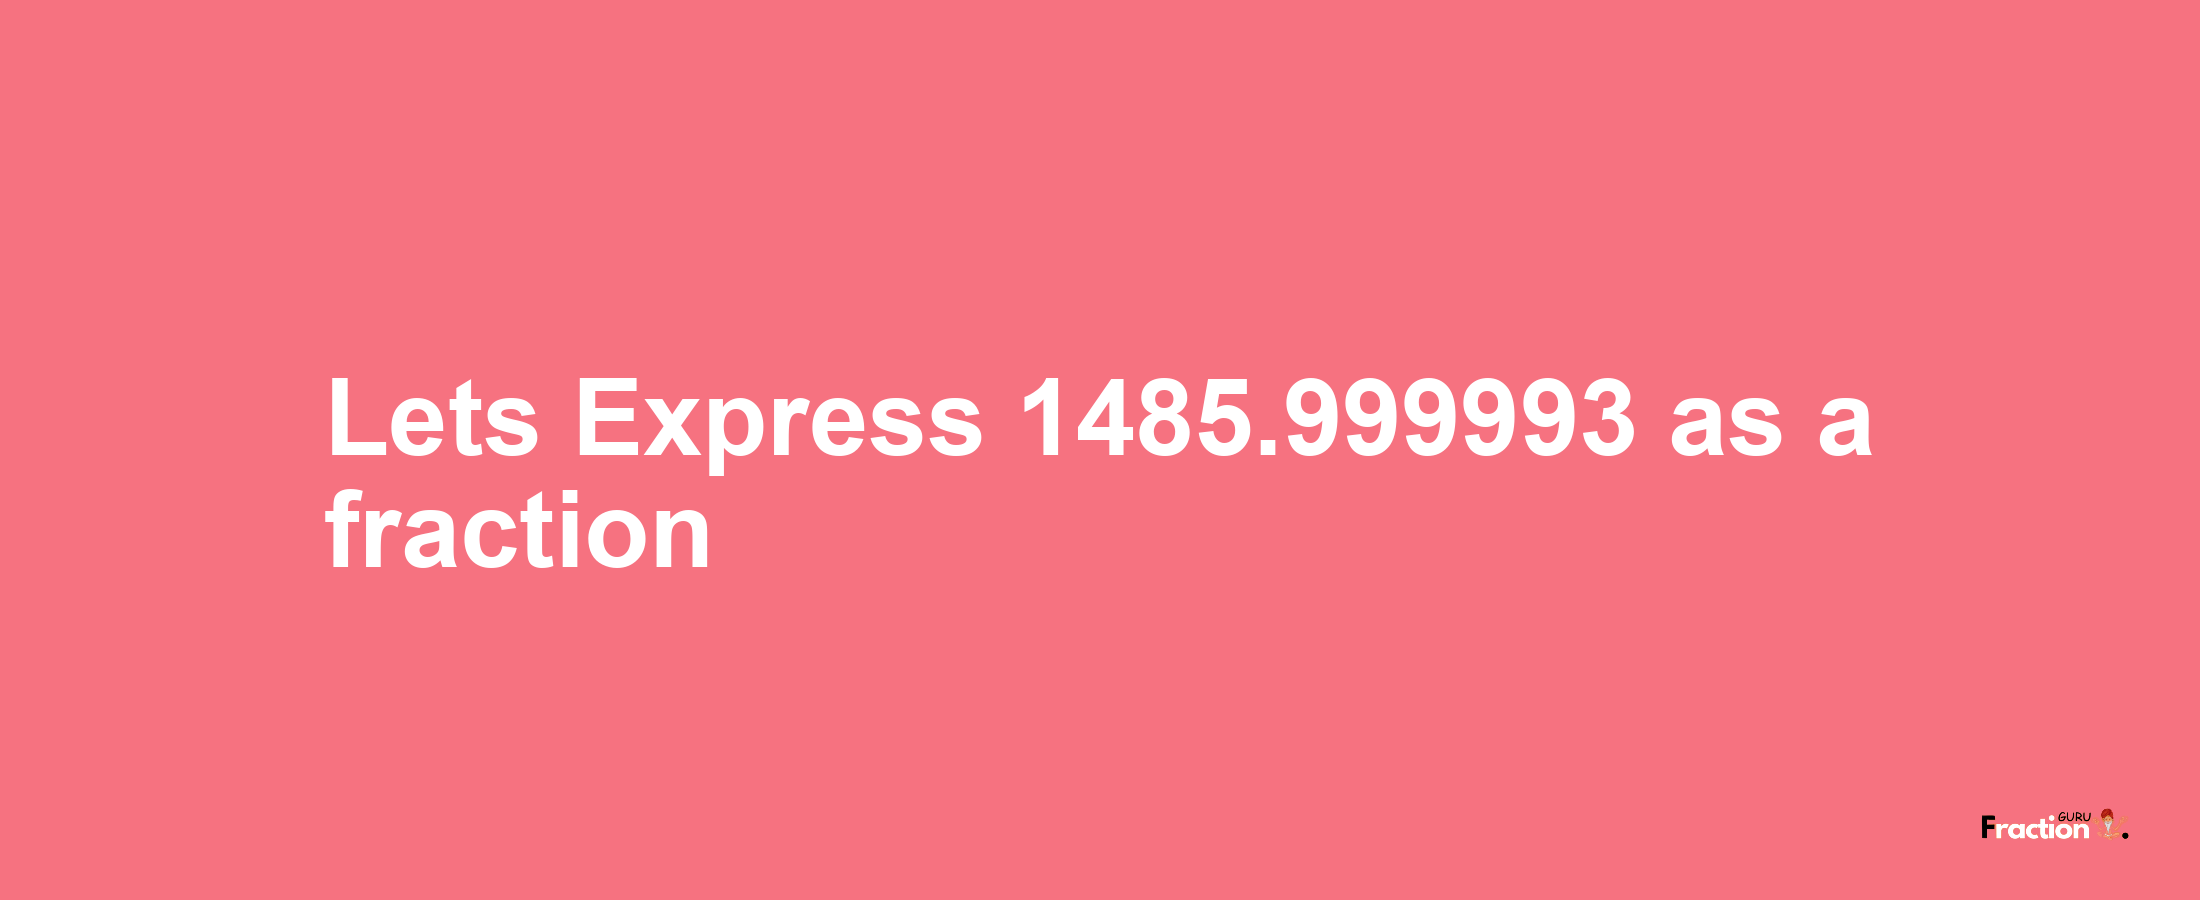 Lets Express 1485.999993 as afraction